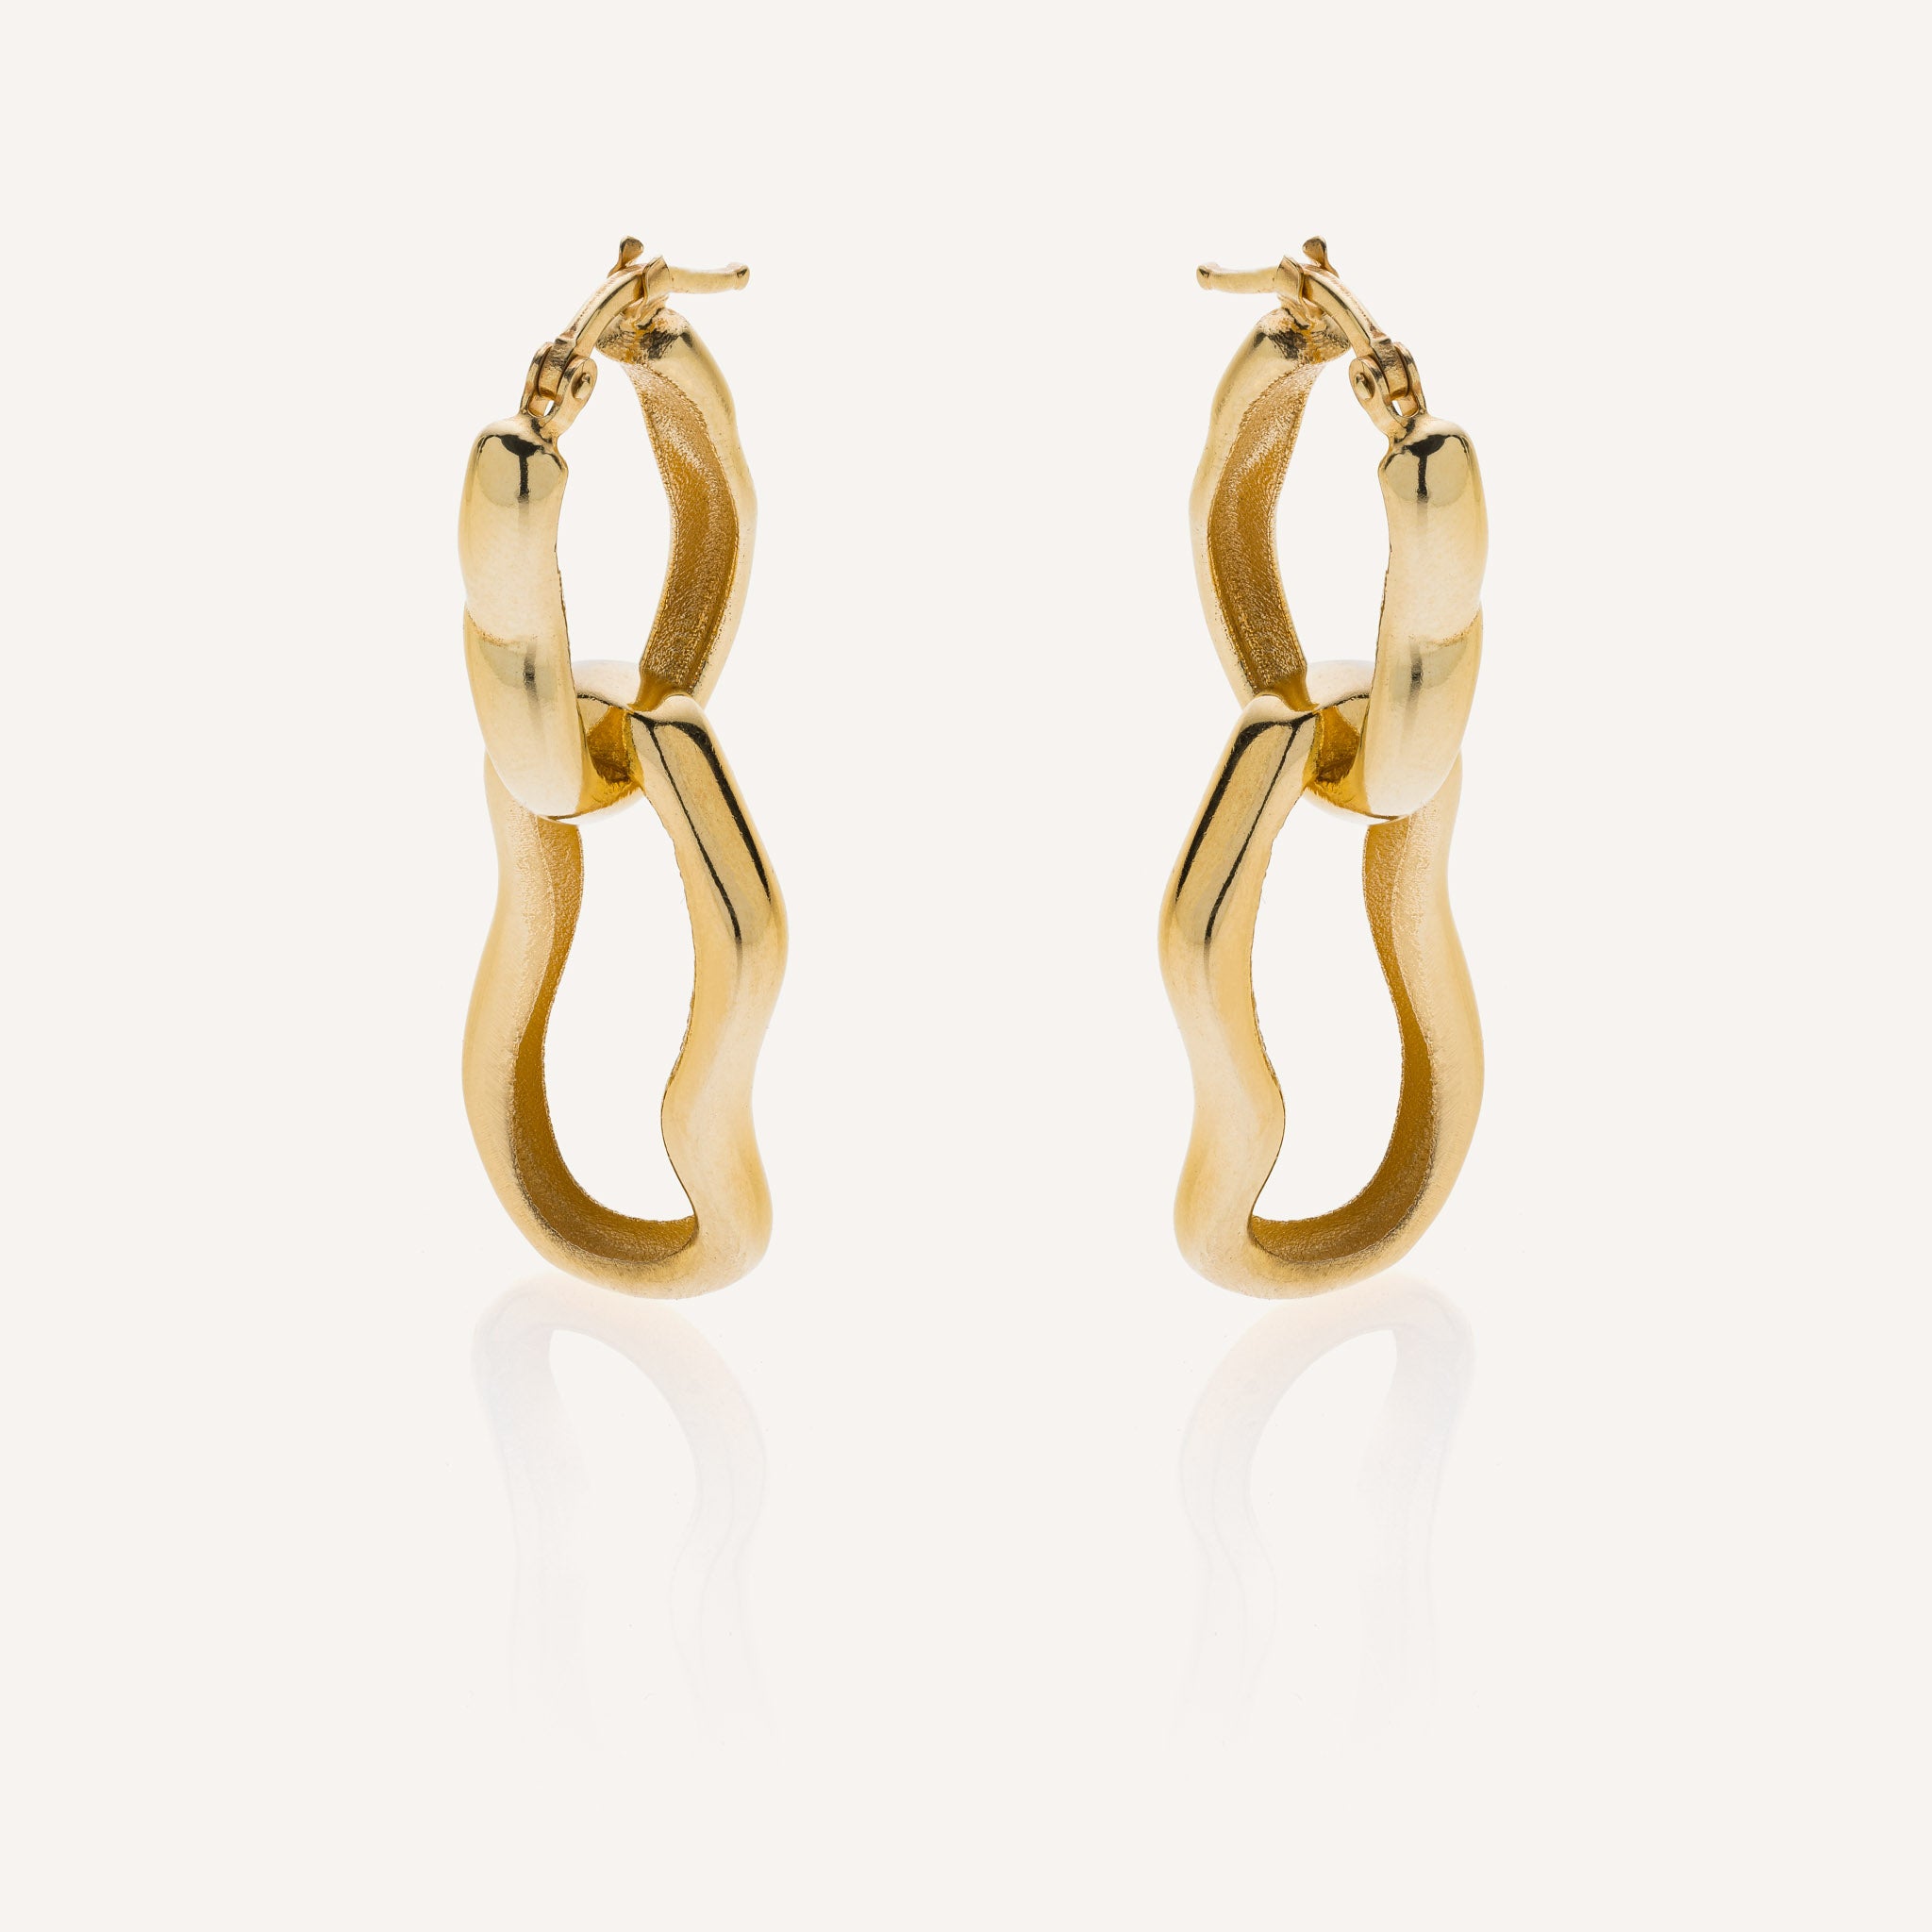 Fauvirame Roots Earrings Gold-